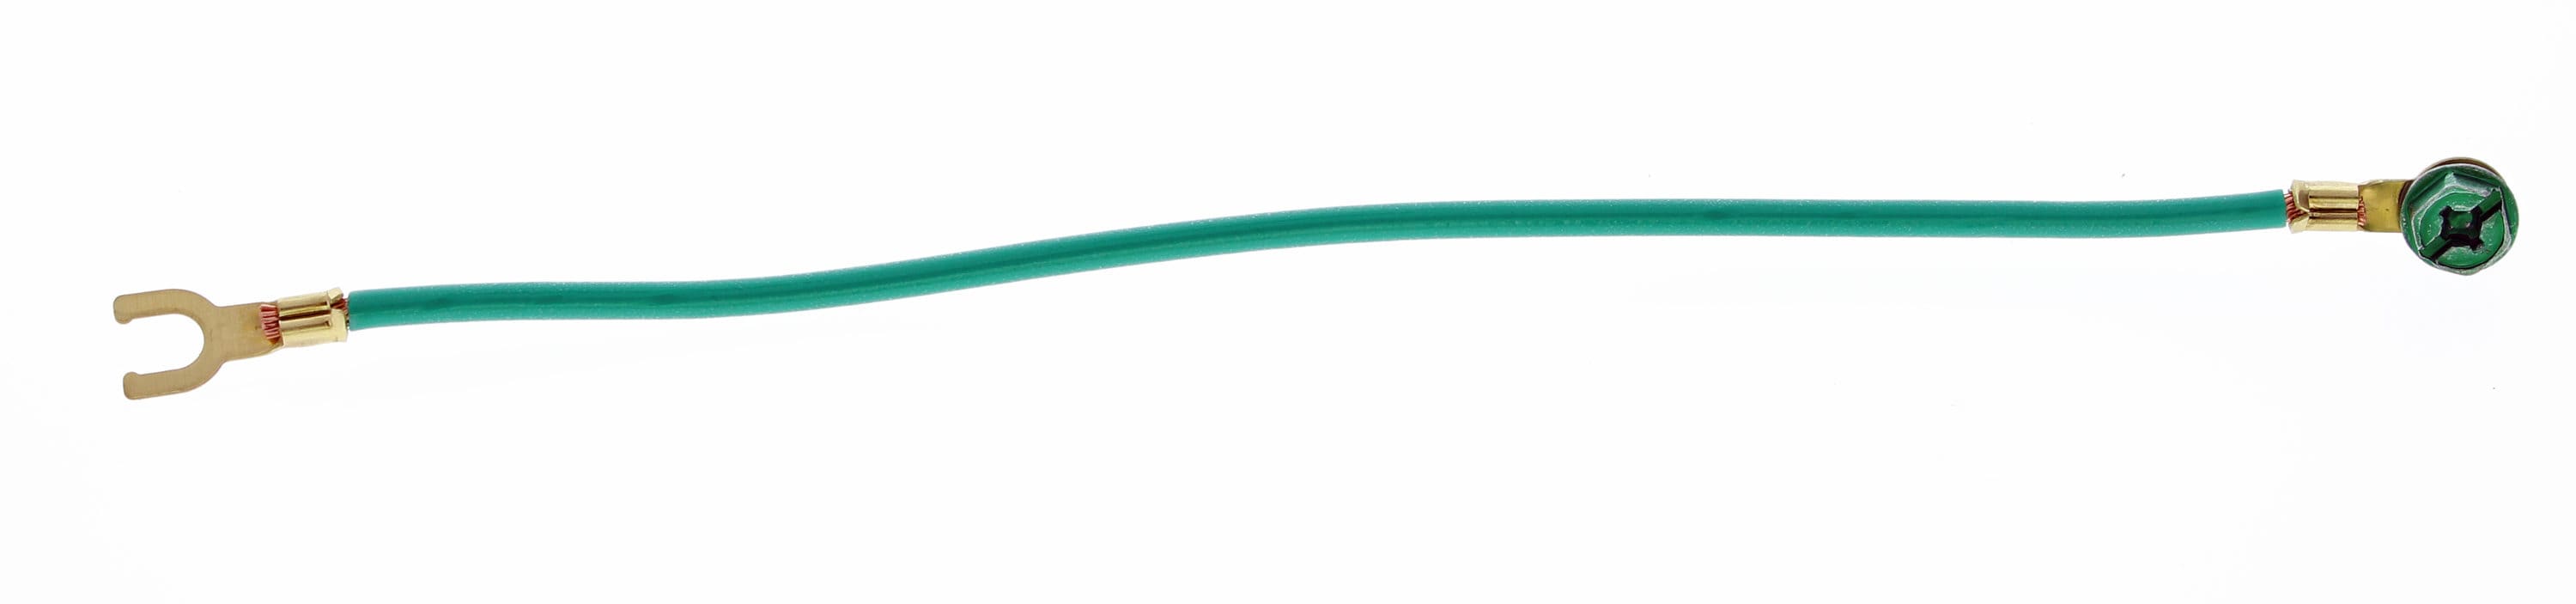 12 AWG 5-pack Solid Grounding Pigtail 8 inch 